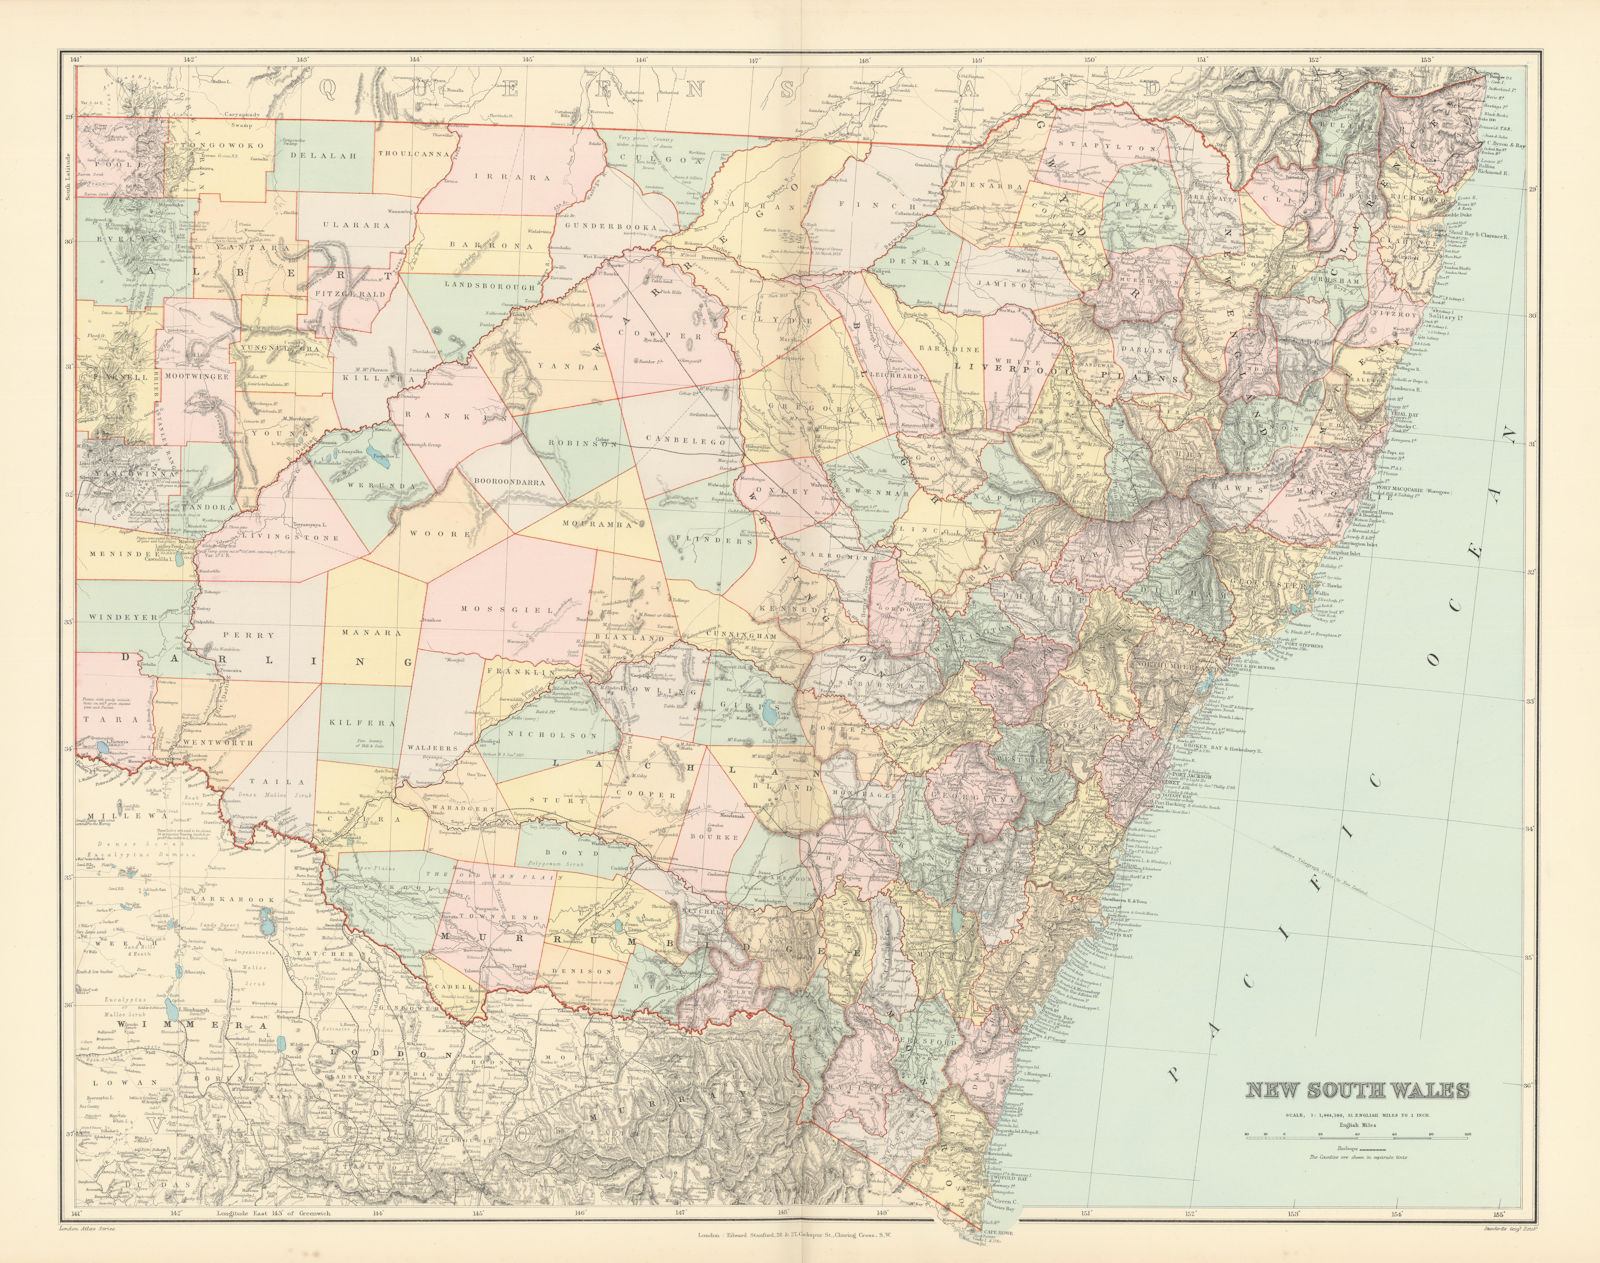 New South Wales showing counties & railways. 53x65cm. STANFORD 1896 old map